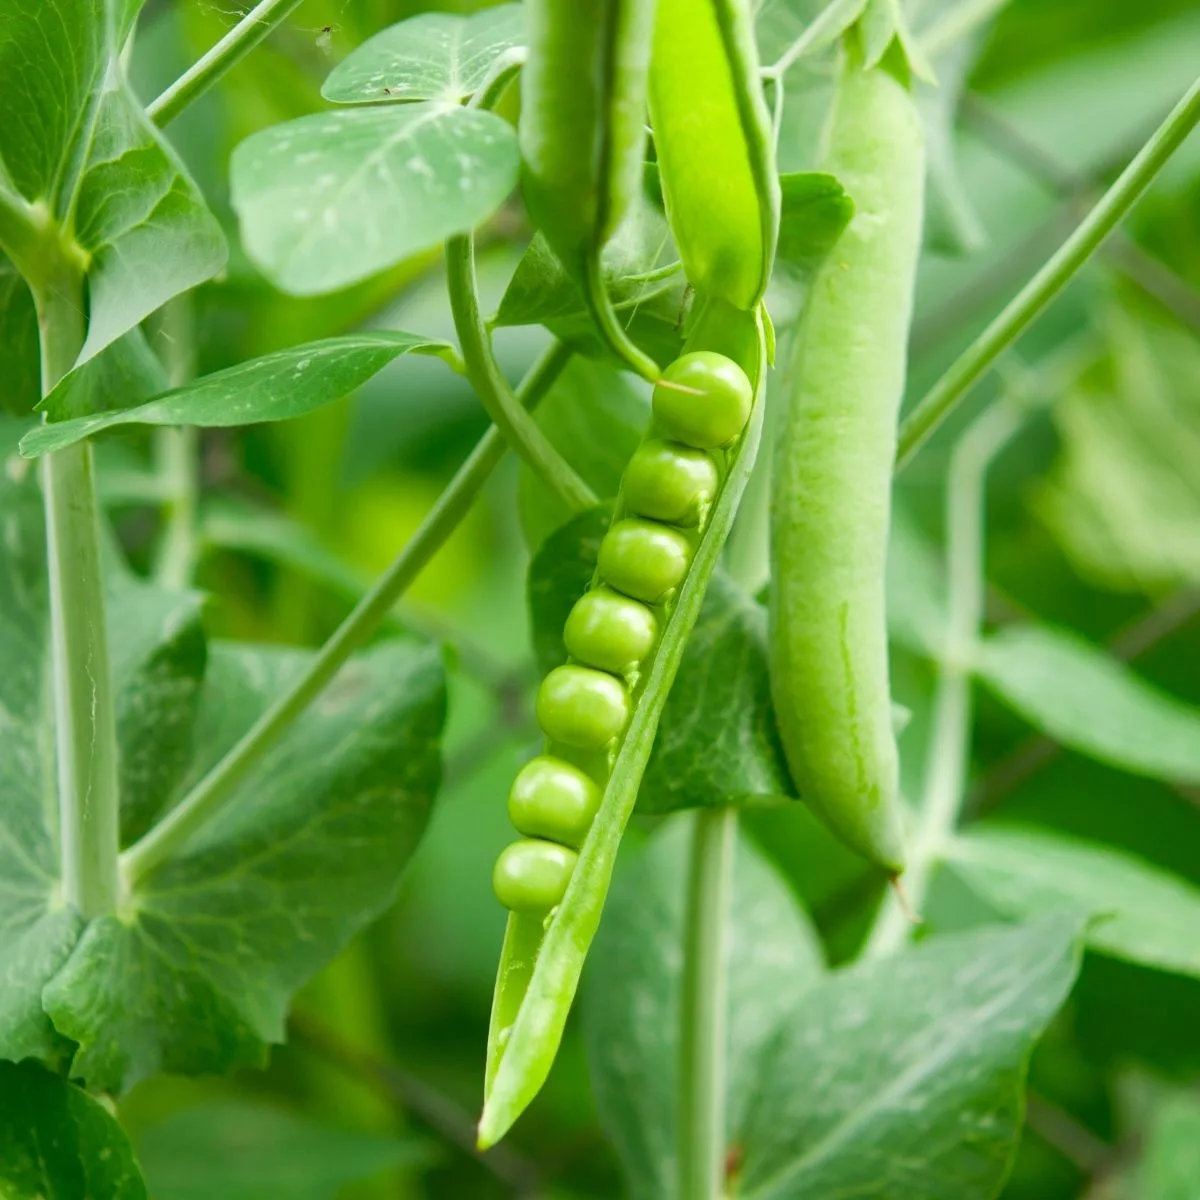 green peas in the pod on the plant